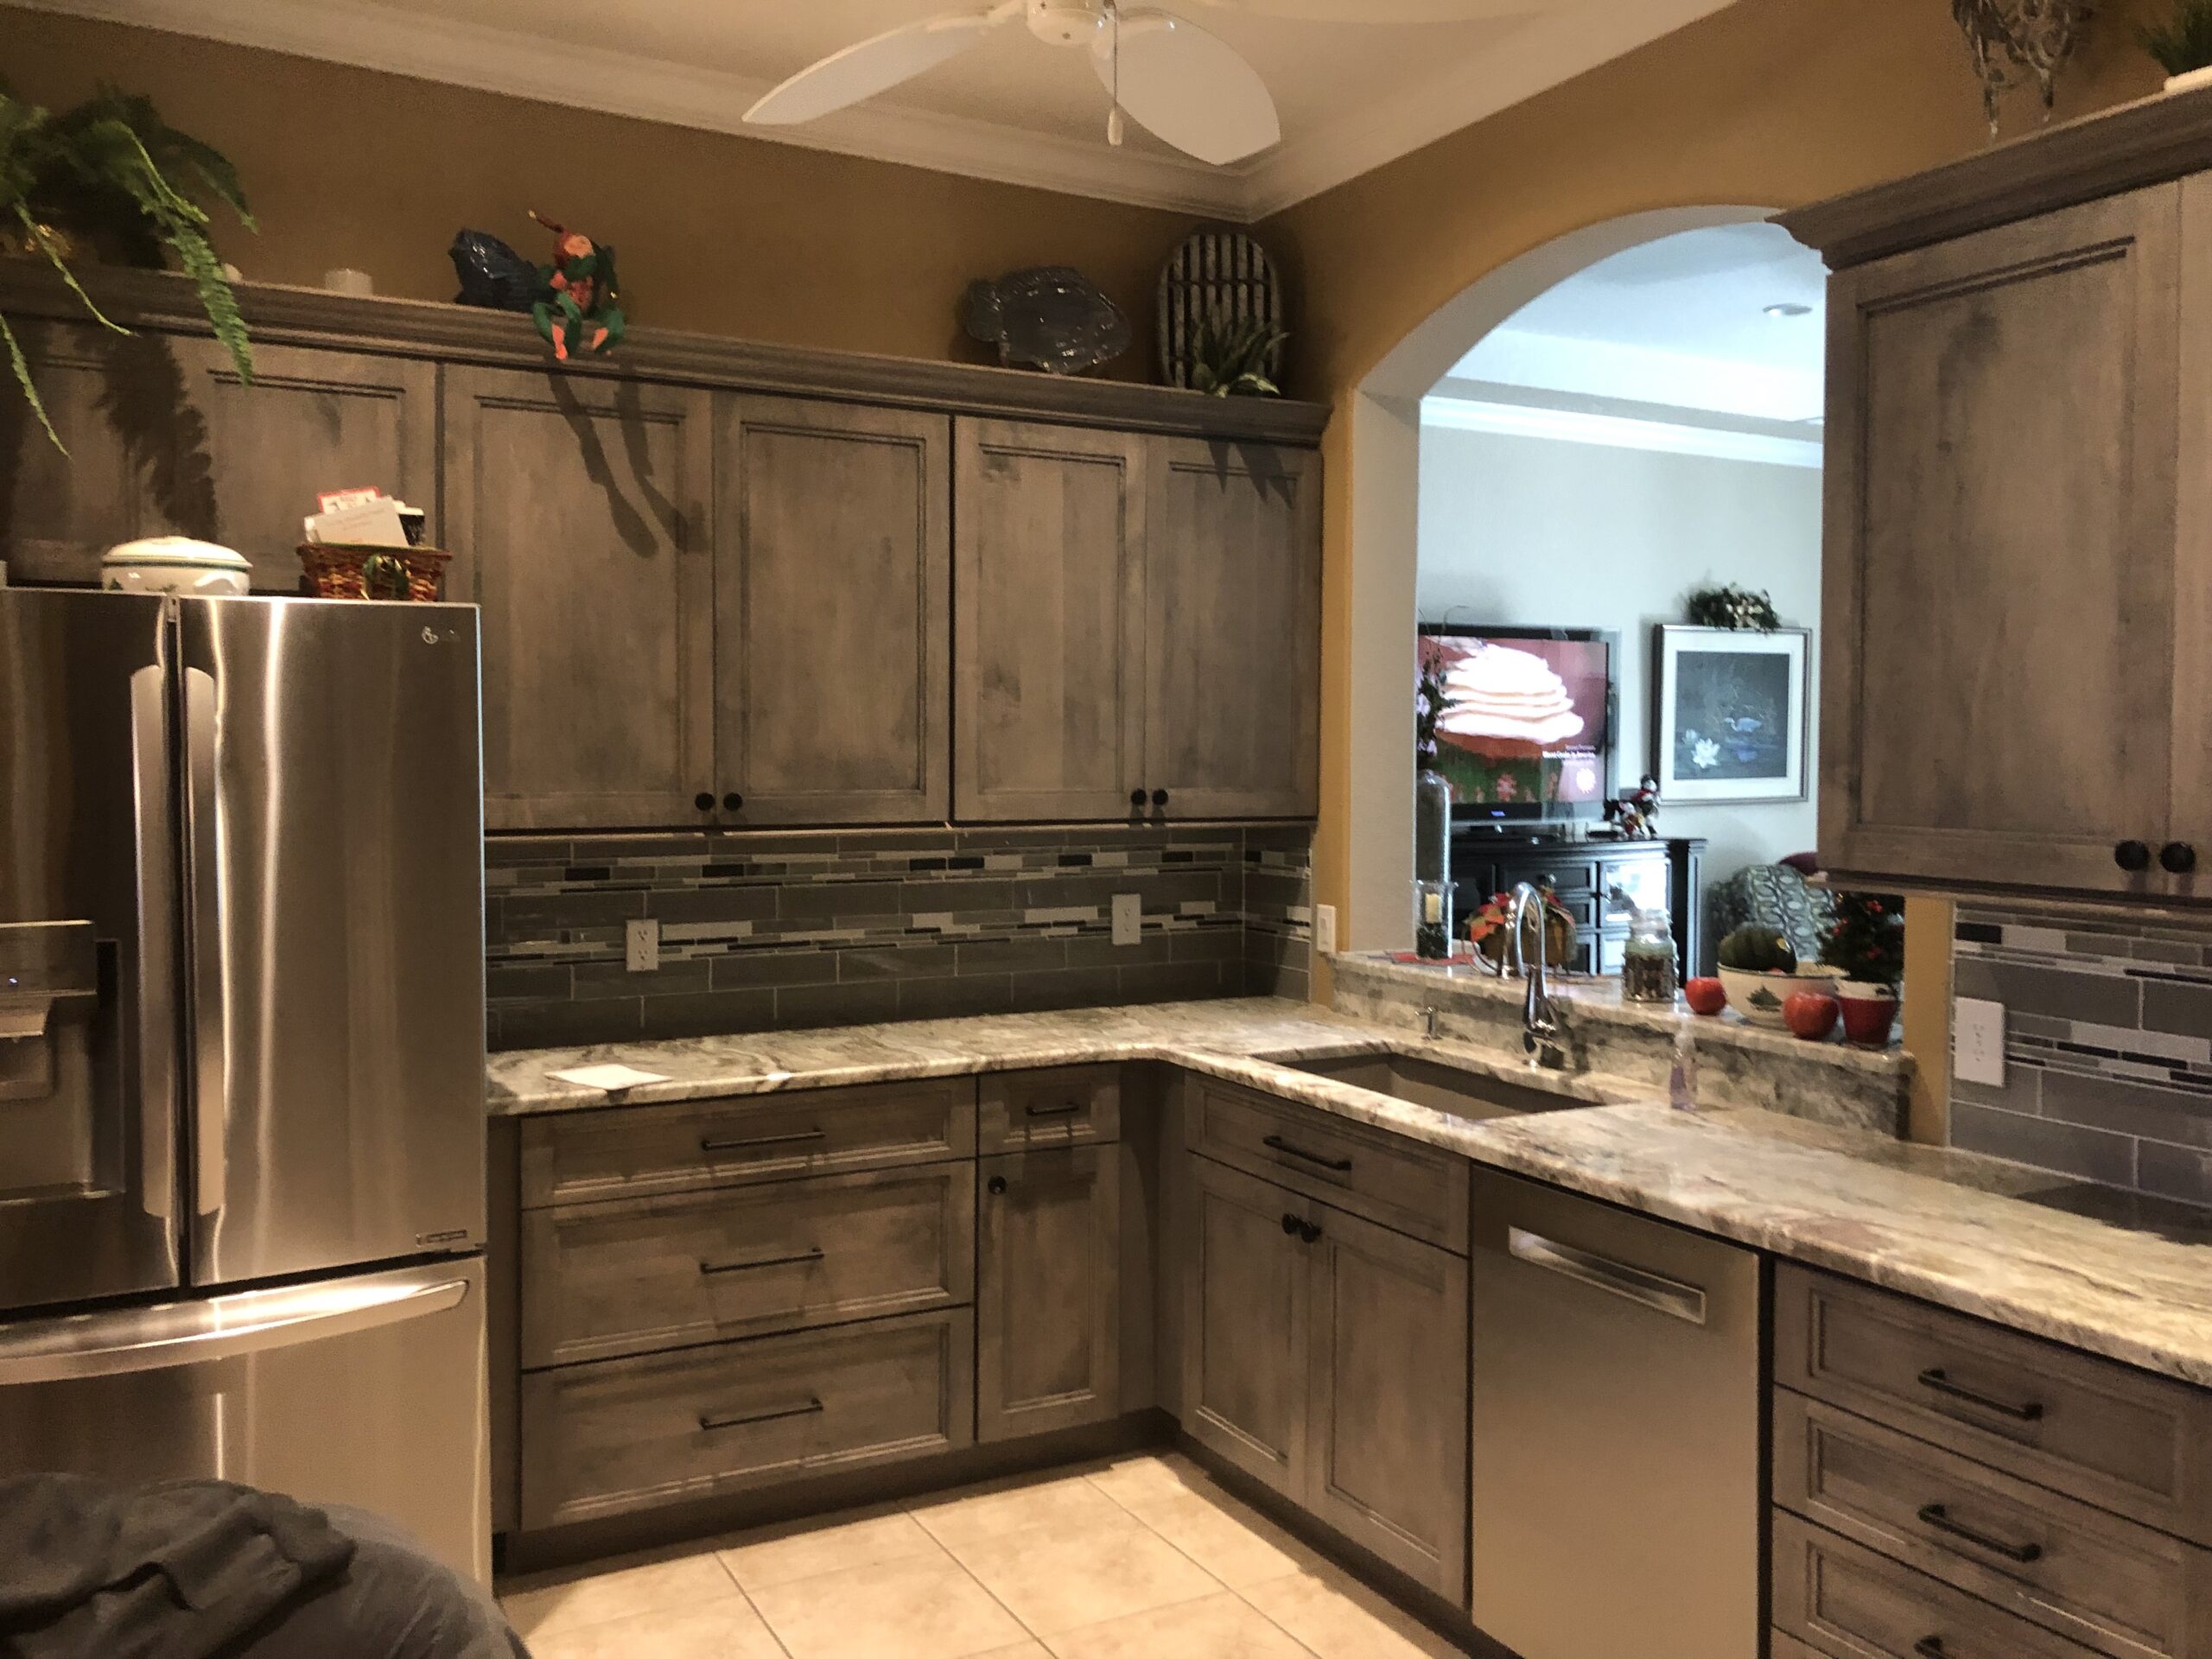 Modern high quality Kitchen Cabinet, Cabinet Doors, and Cabinet refacing done in Florida